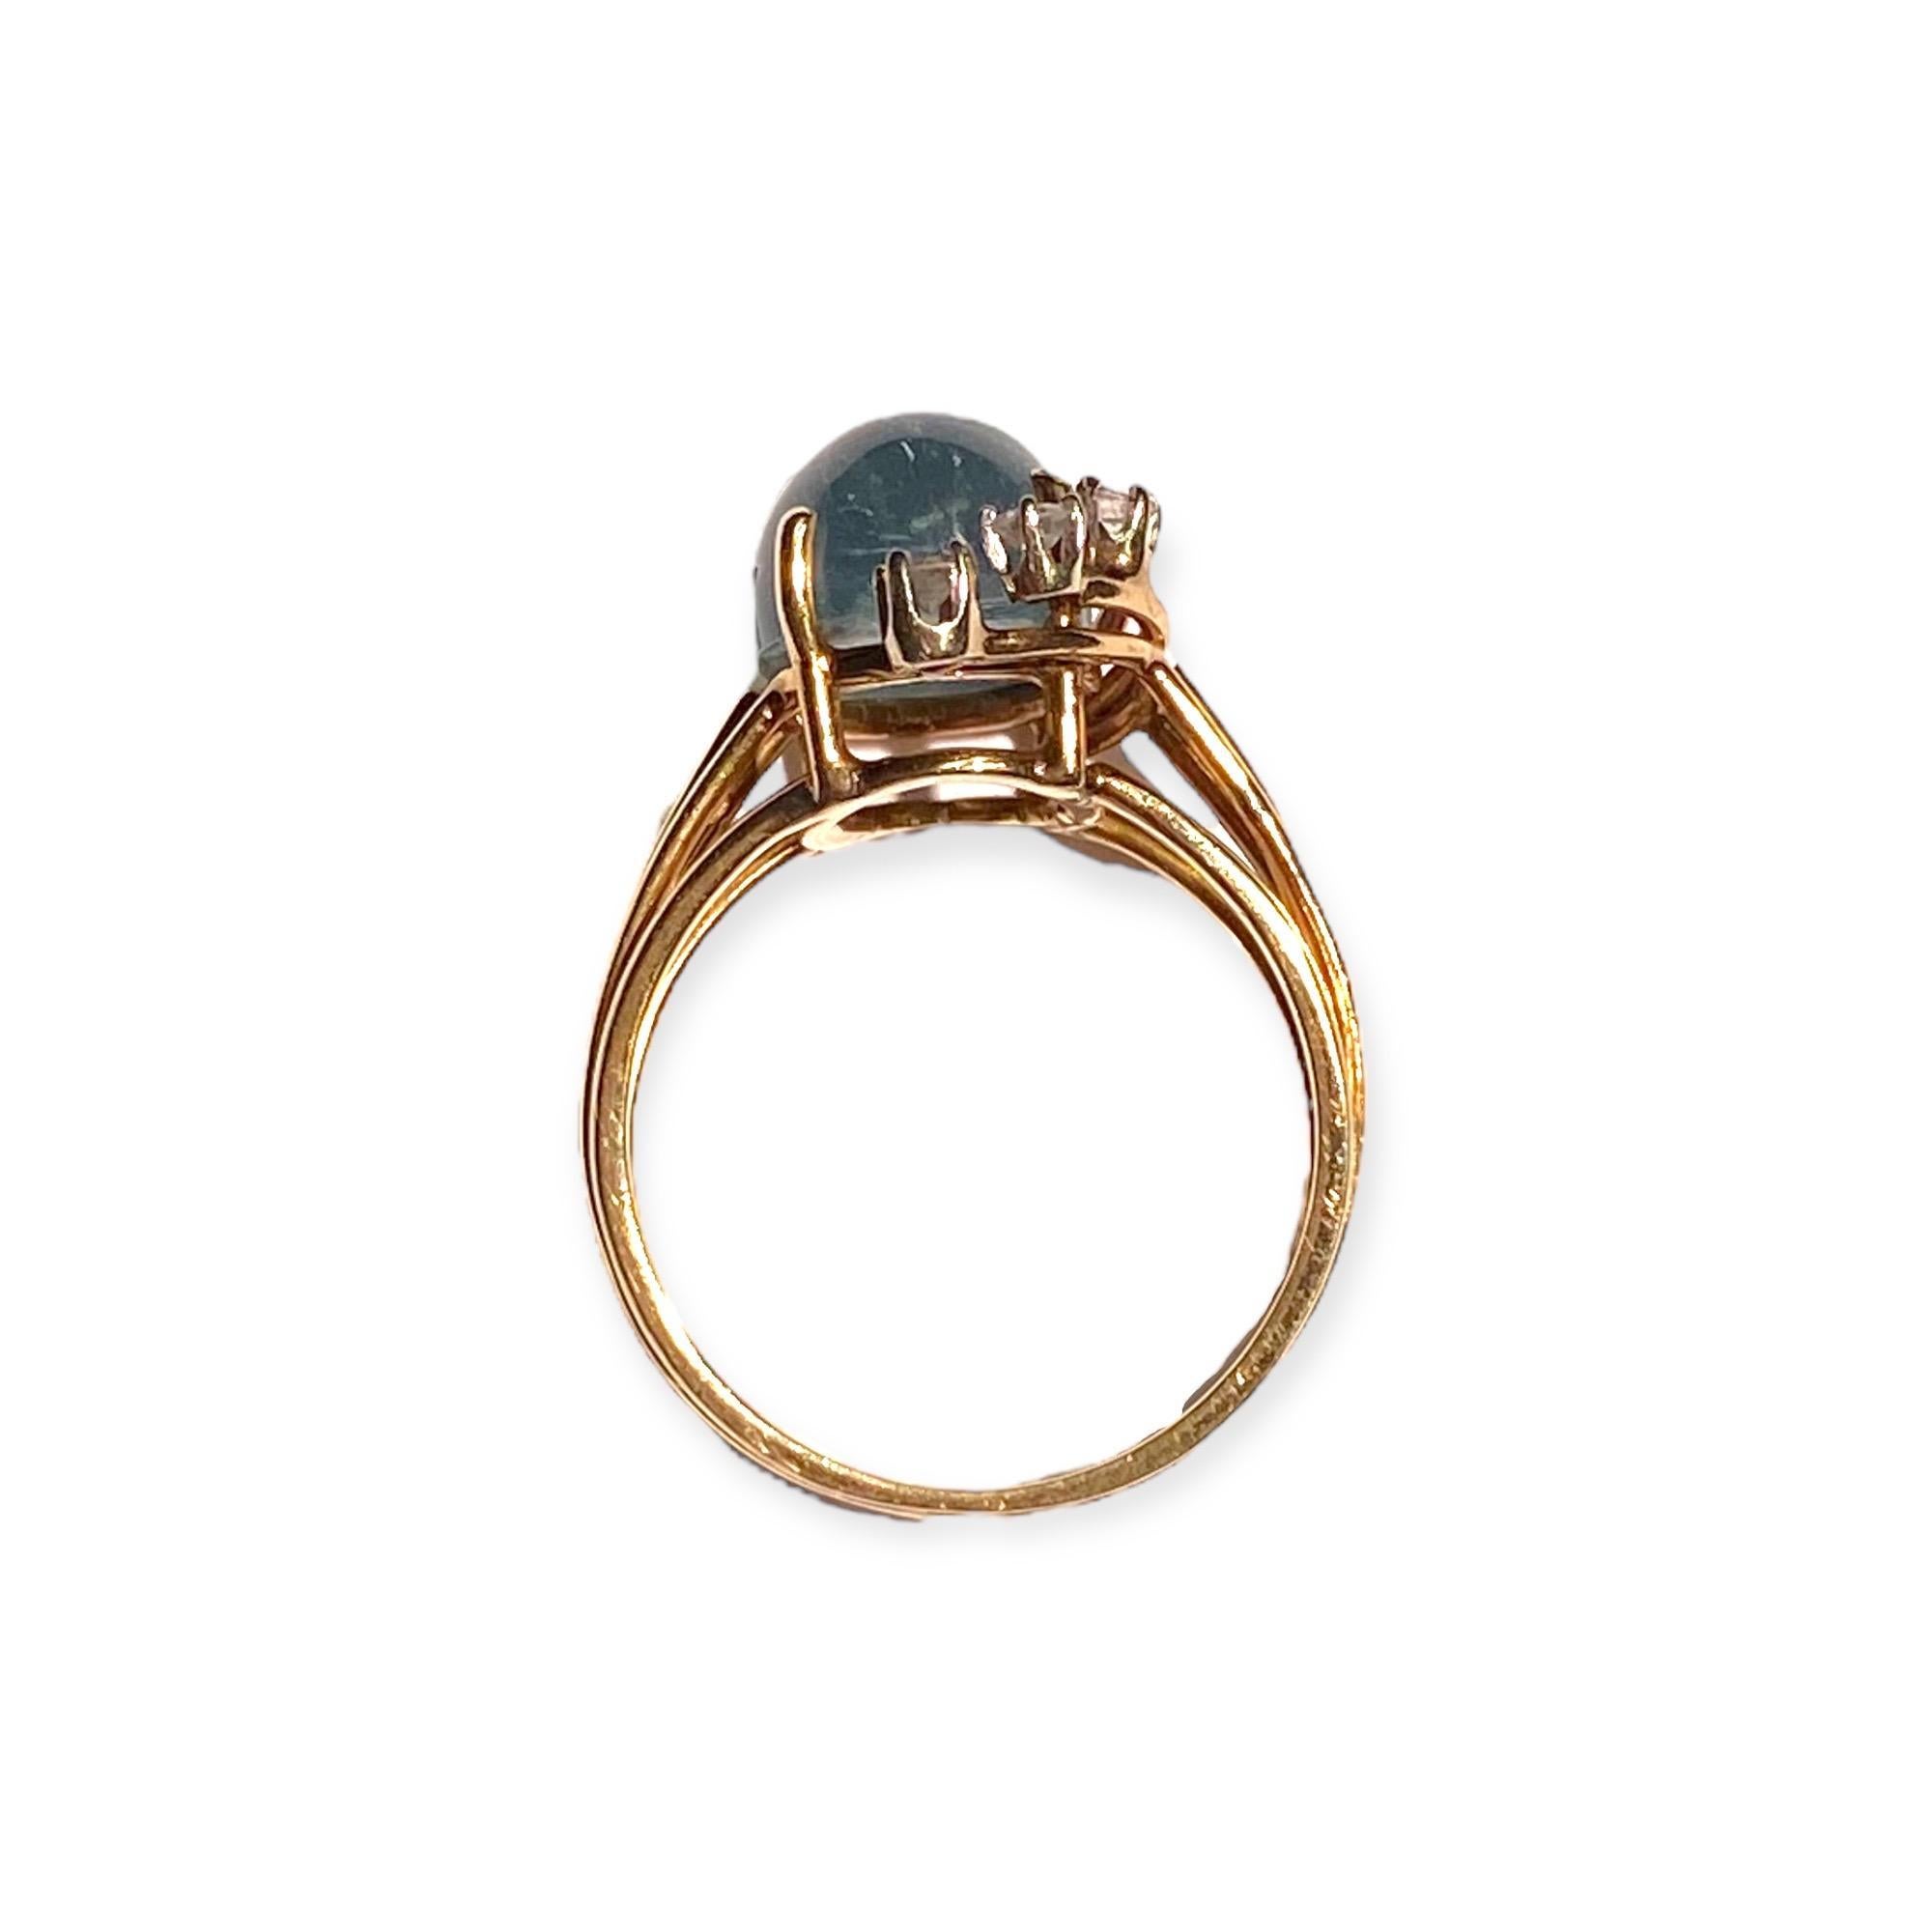 Crafted in 14K yellow gold, the ring features an oval cabochon cut aquamarine accented by three diamonds, supported by split shoulders, completed by a three millimeter wide band.
Aquamarine: 13 mm H x 9 mm W x 6.4 mm D.  Estimated weight: 5.4ct.
3